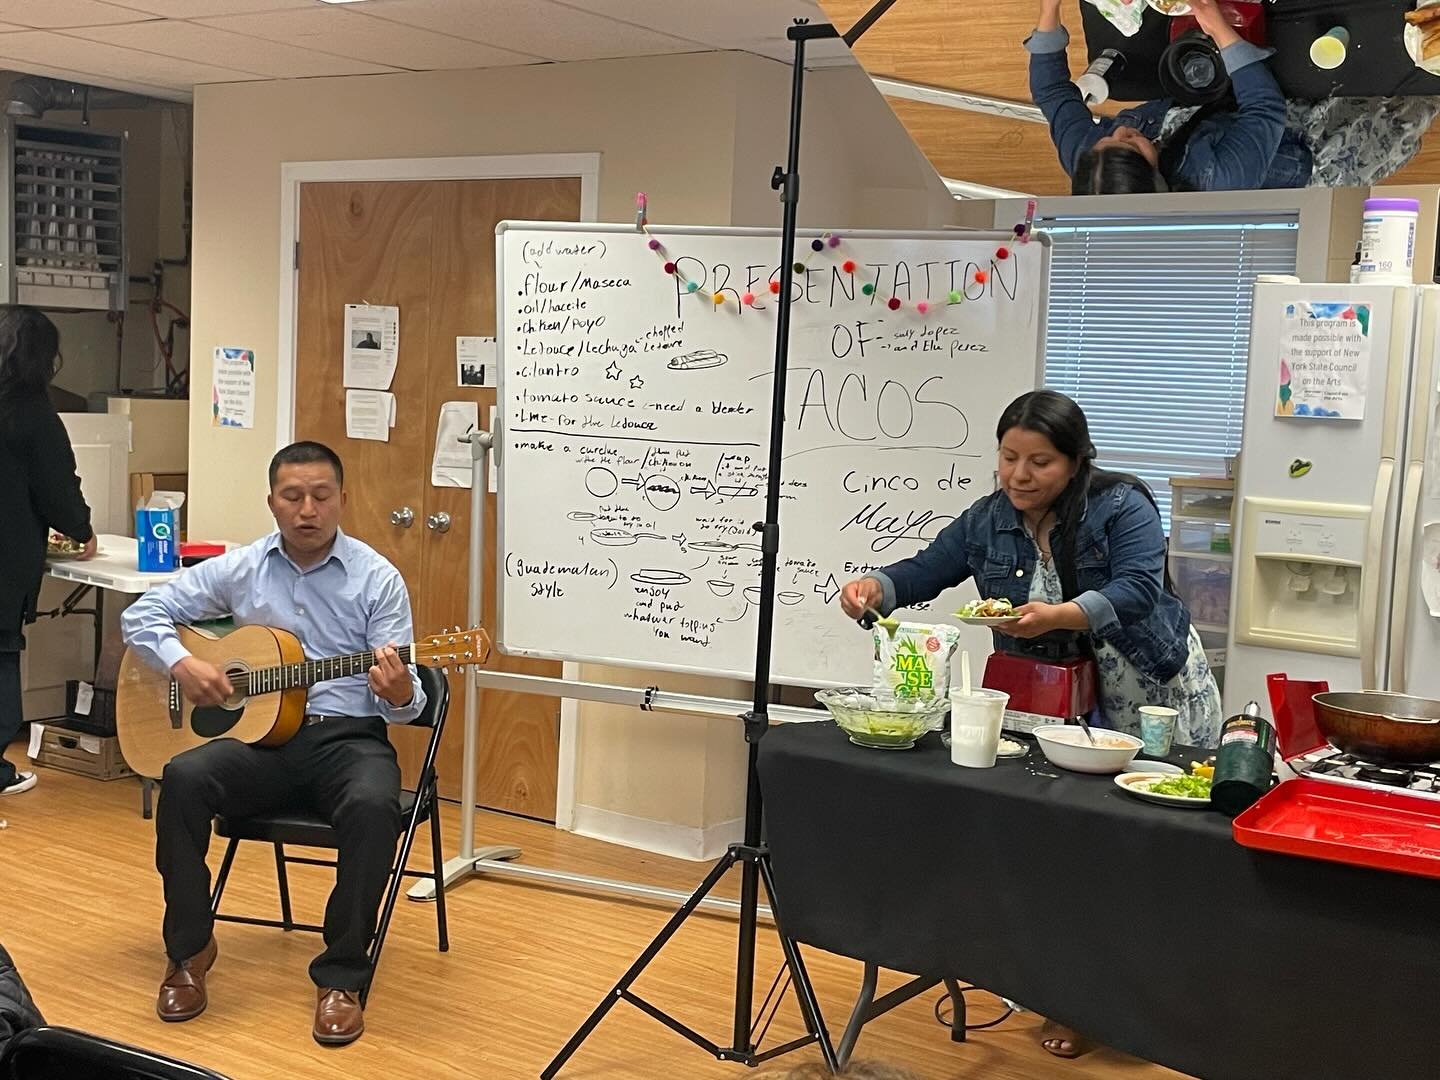 We spent our Cinco de Mayo learning how to make crispy tacos 🌮! They were paired with delicious salsas too. Check out their recipe in the last picture!! Thank you to Suly and Eluviana for showing us your talents!

The musical performance by Francisc